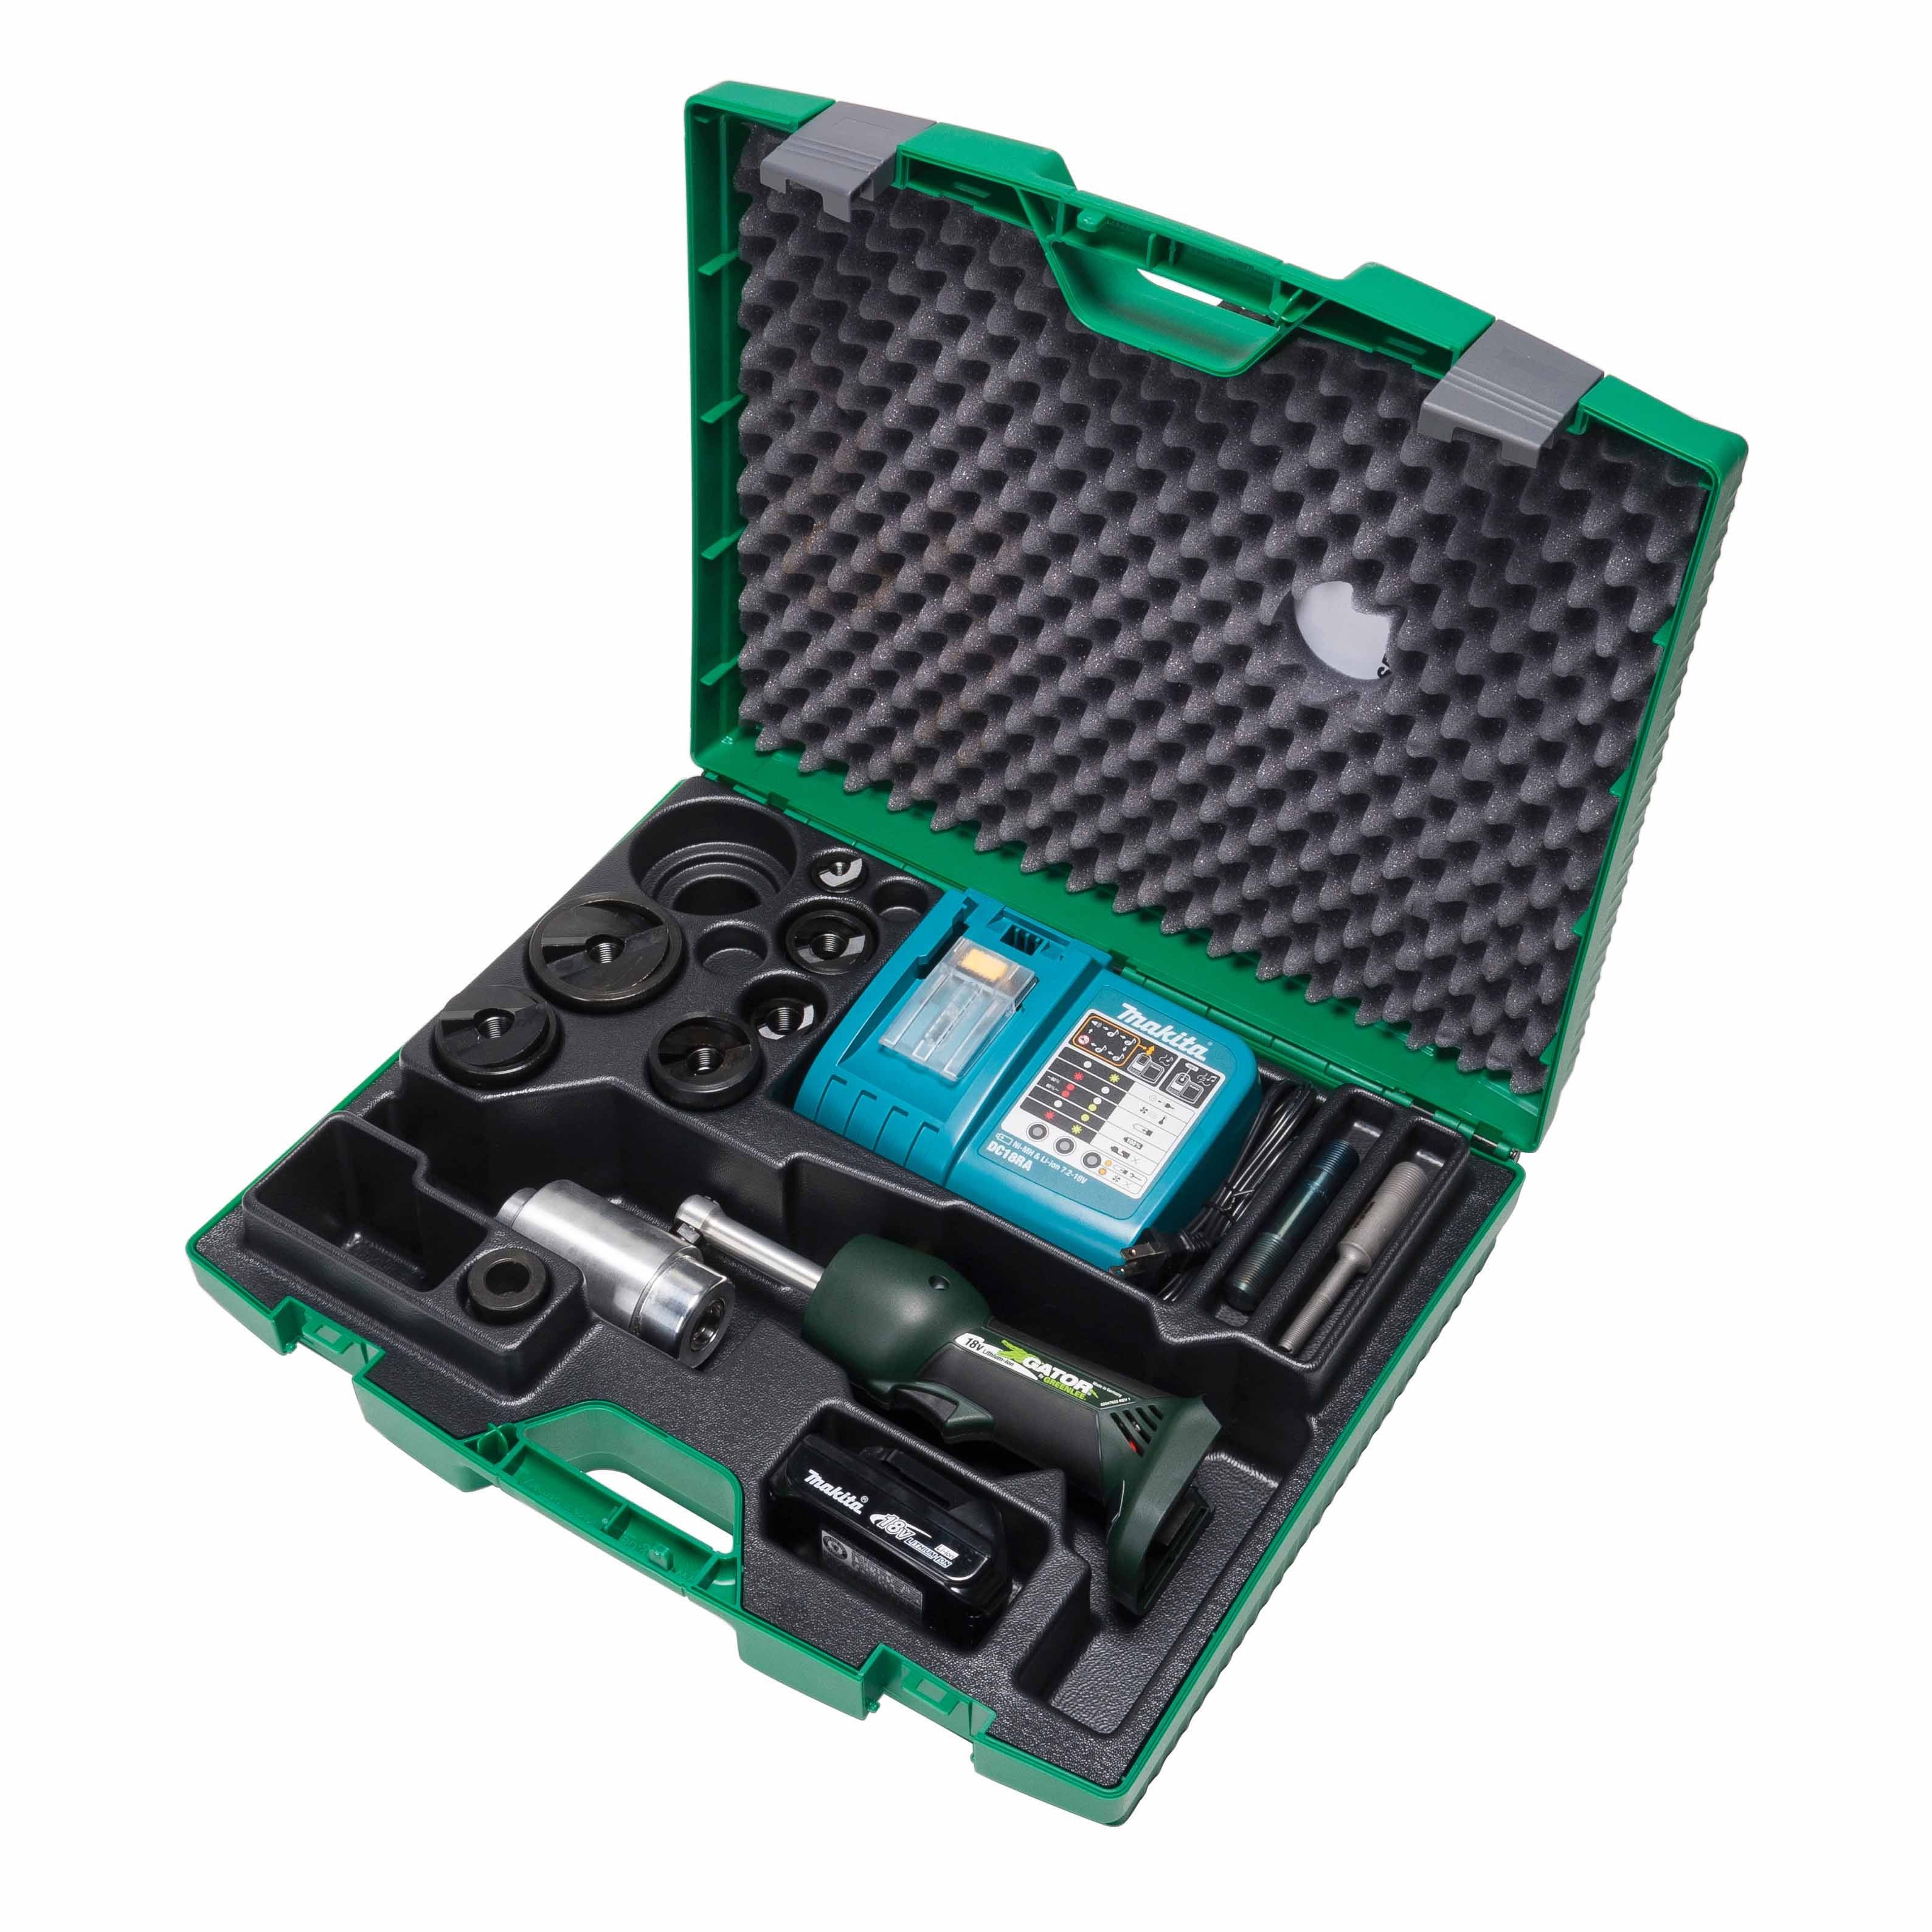 Greenlee LS50L11B Battery-Powered Knockout Punch Driver Tool Kit